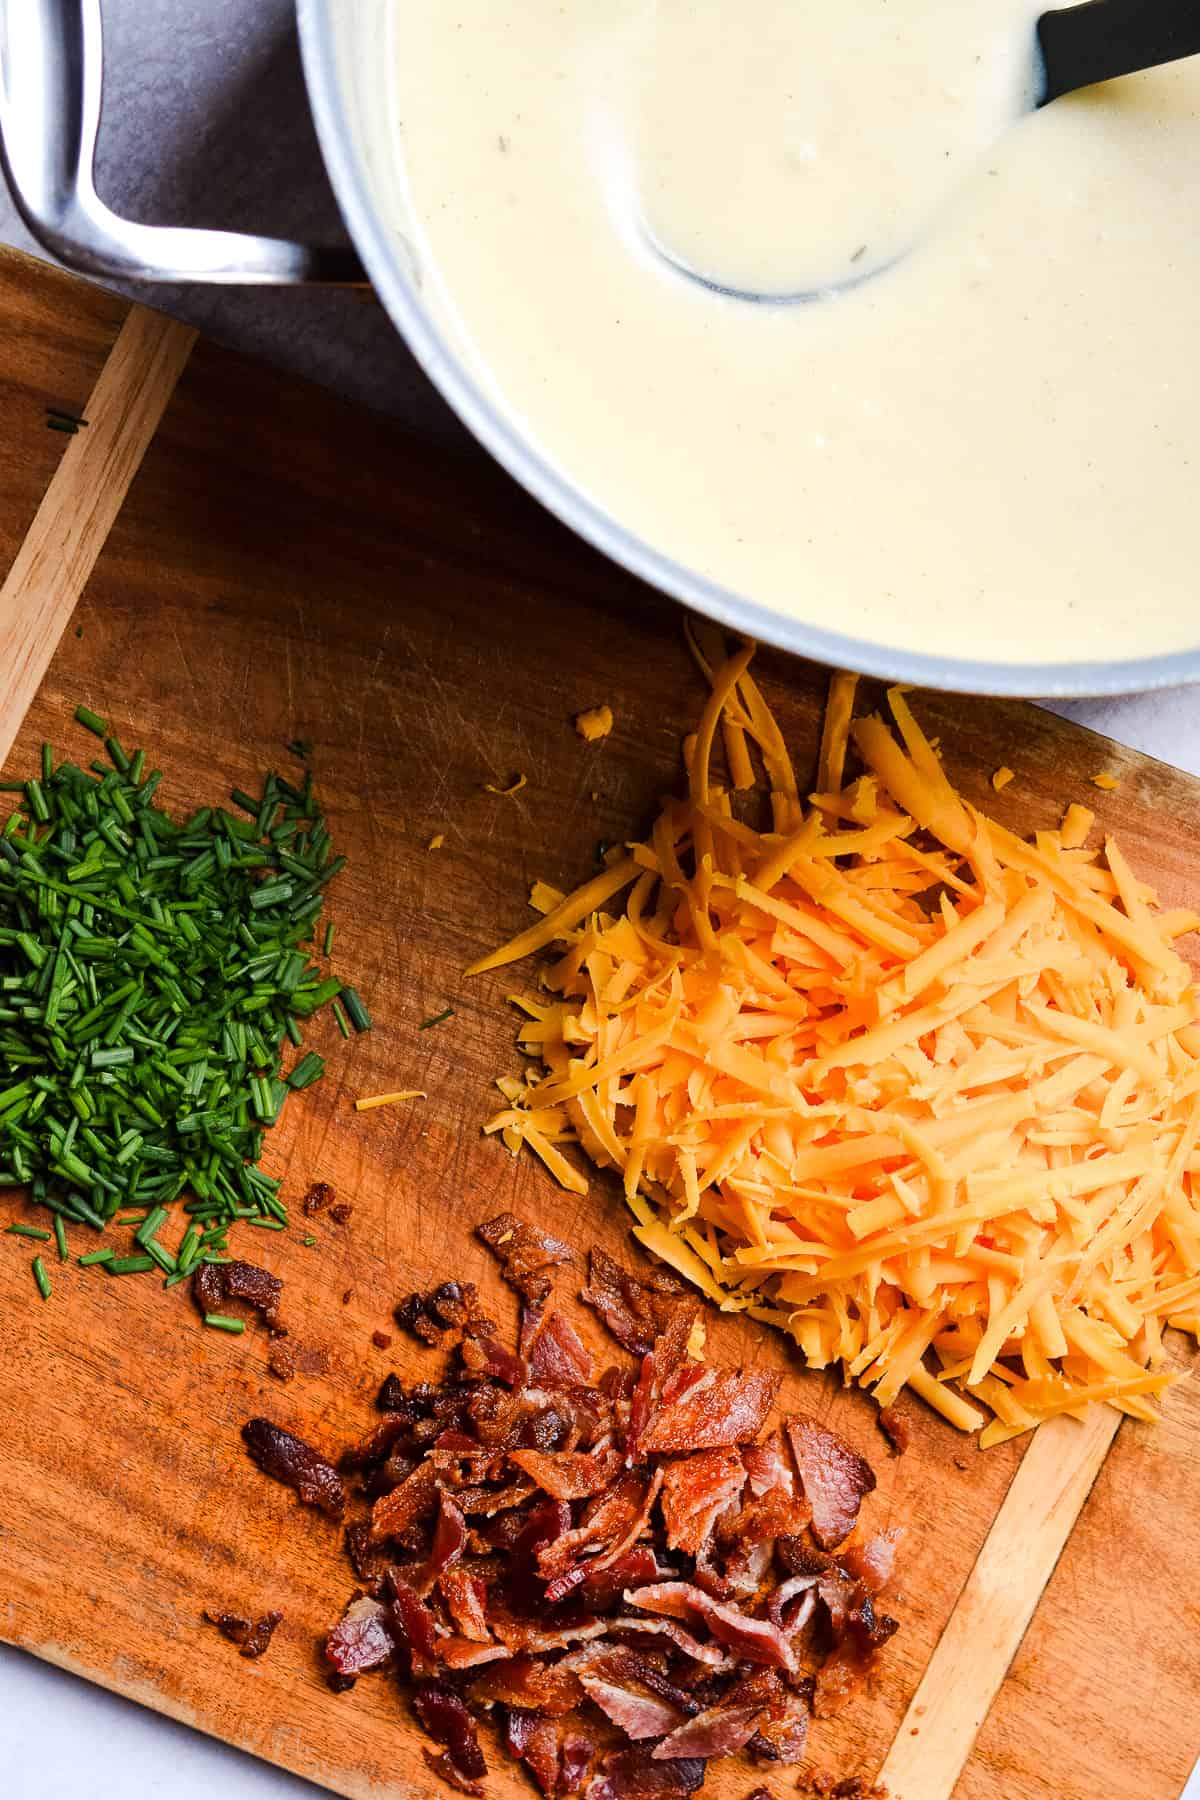 Pot of soup with shredded cheese, bacon and chives on the side.